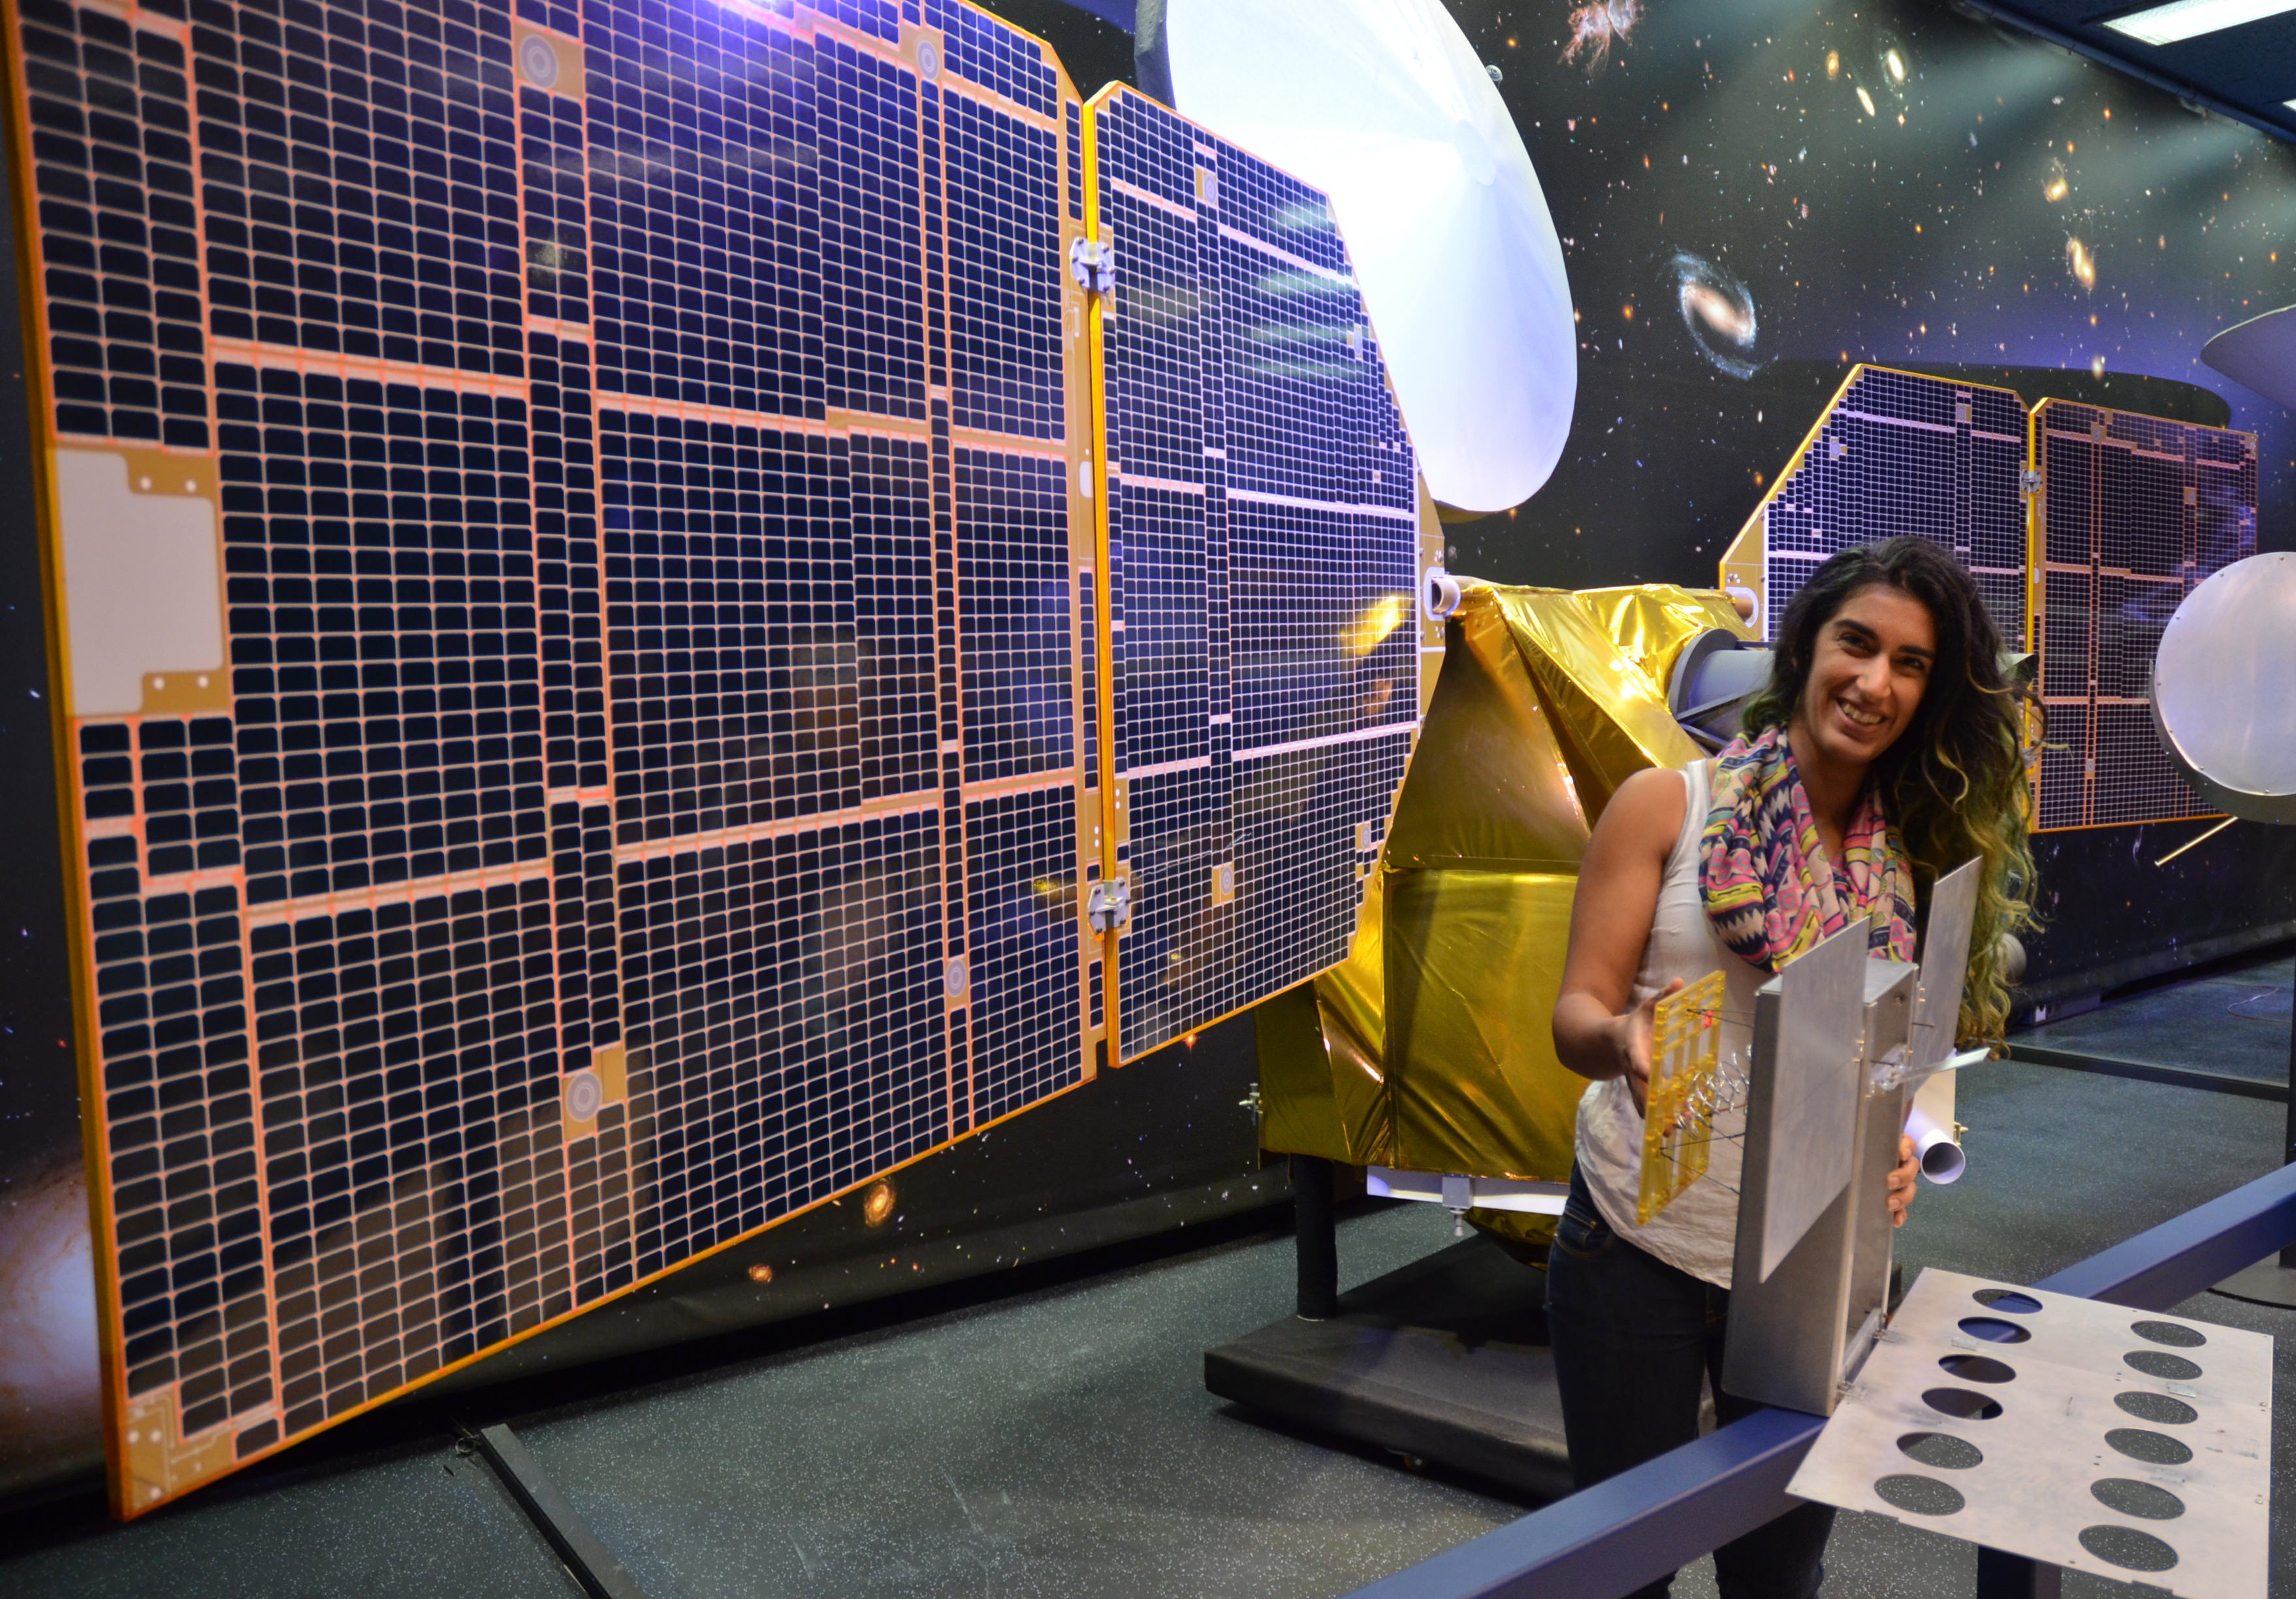 The full-scale mock-up of NASA's MarCO CubeSat held by Farah Alibay, a systems engineer for the technology demonstration, is dwarfed by the one-half-scale model of NASA's Mars Reconnaissance Orbiter behind her.  Credits: NASA/JPL-Caltech